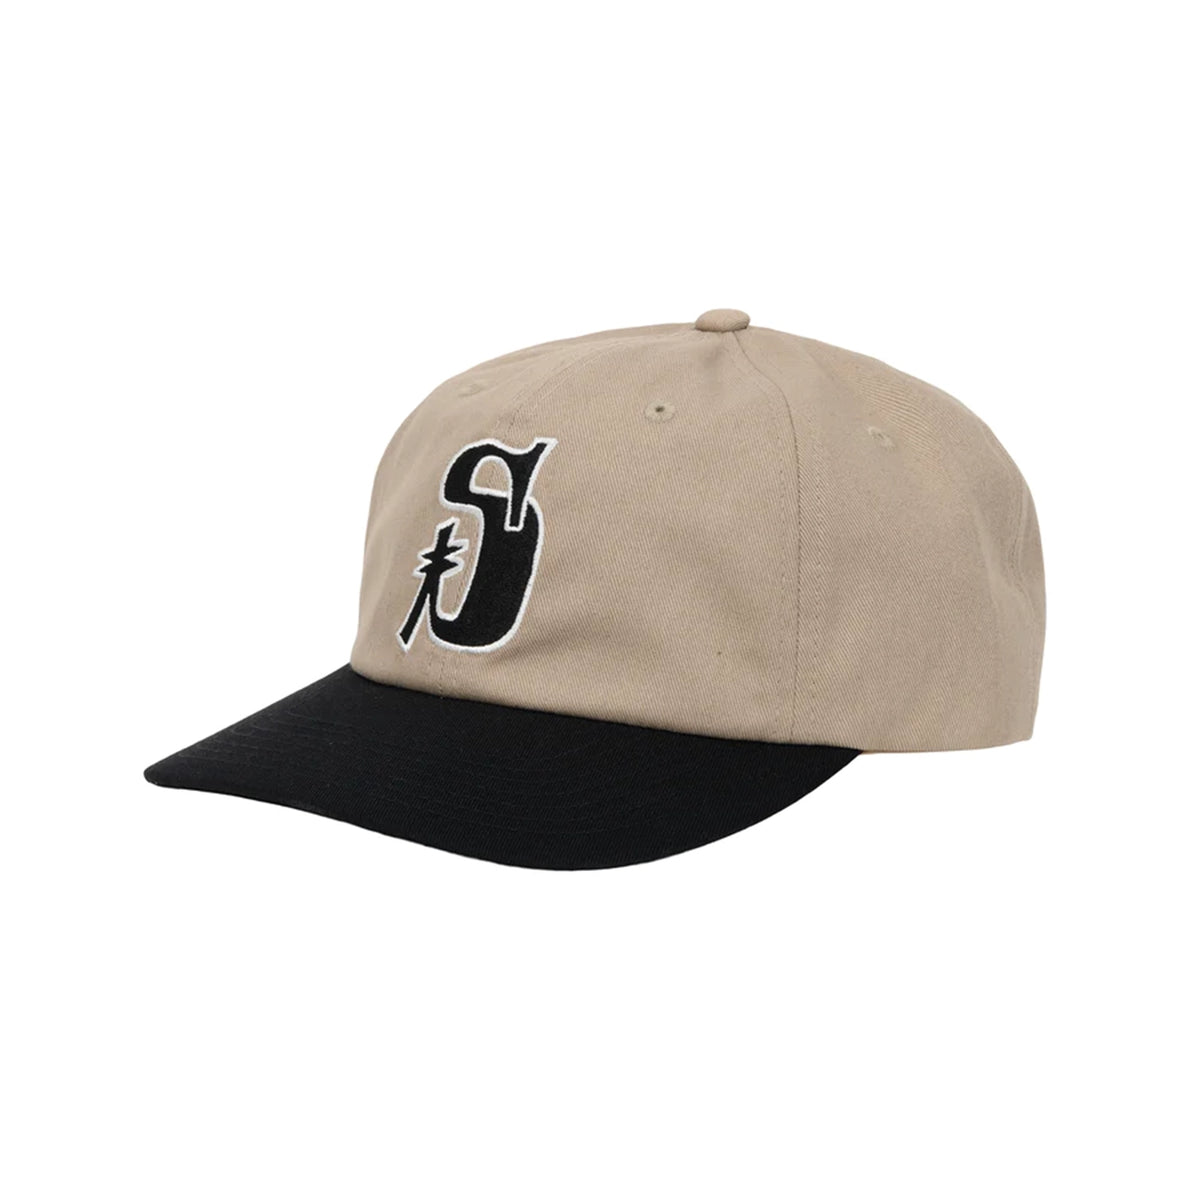 Vintage S Low Pro Cap in Khaki by Stussy | Bored of Southsea